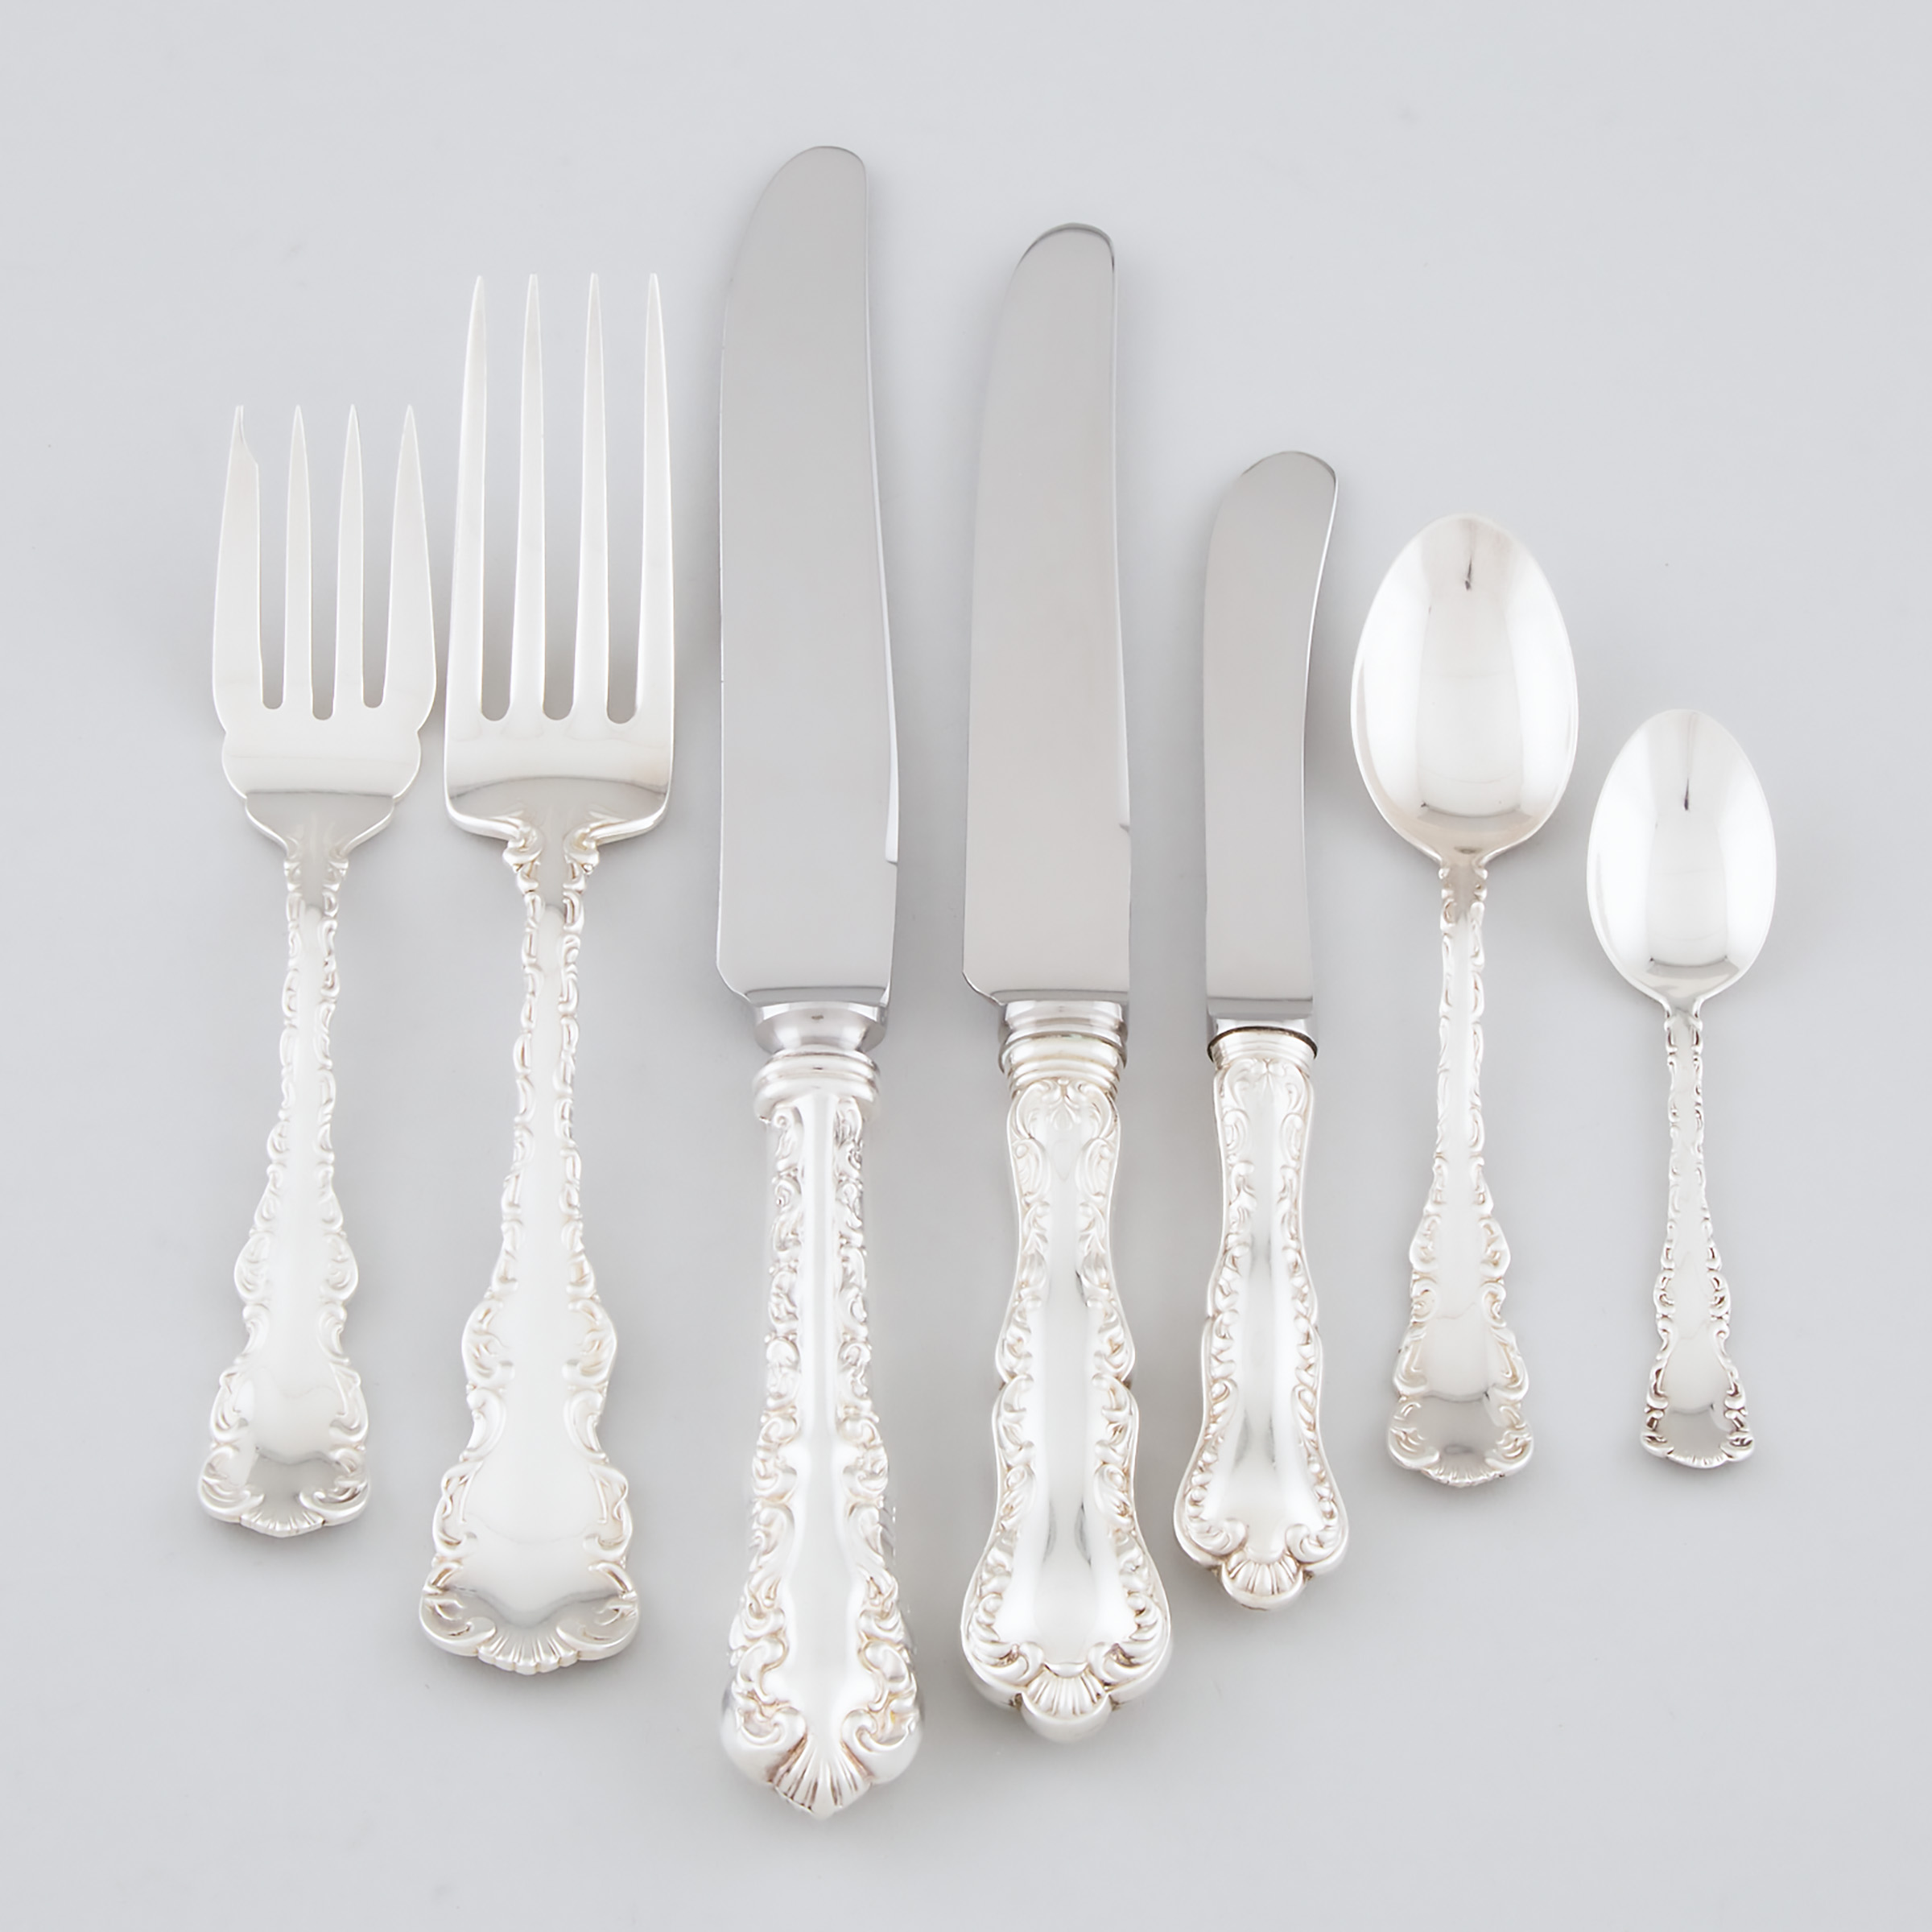 Canadian Silver 'Louis XV' Pattern Flatware, Henry Birks & Sons, Montreal, Que., 20th century